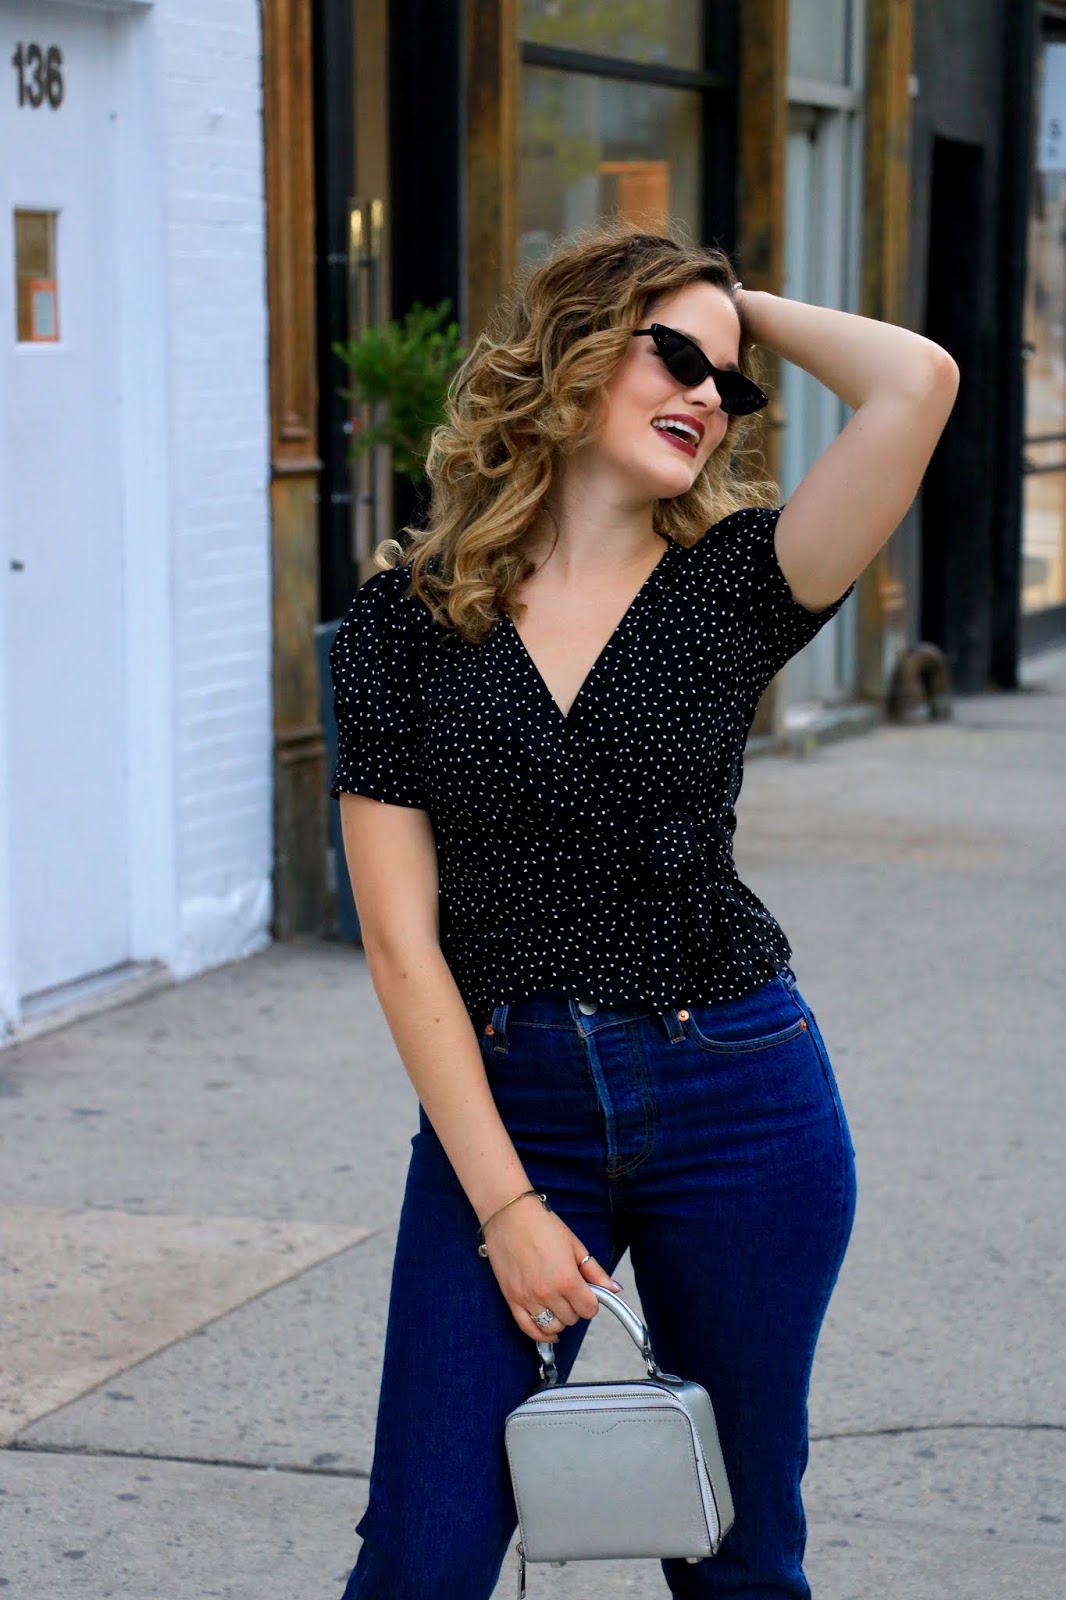 Nyc fashion blogger Kathleen Harper's fall outfit inspiration with jeans and a wrap top.